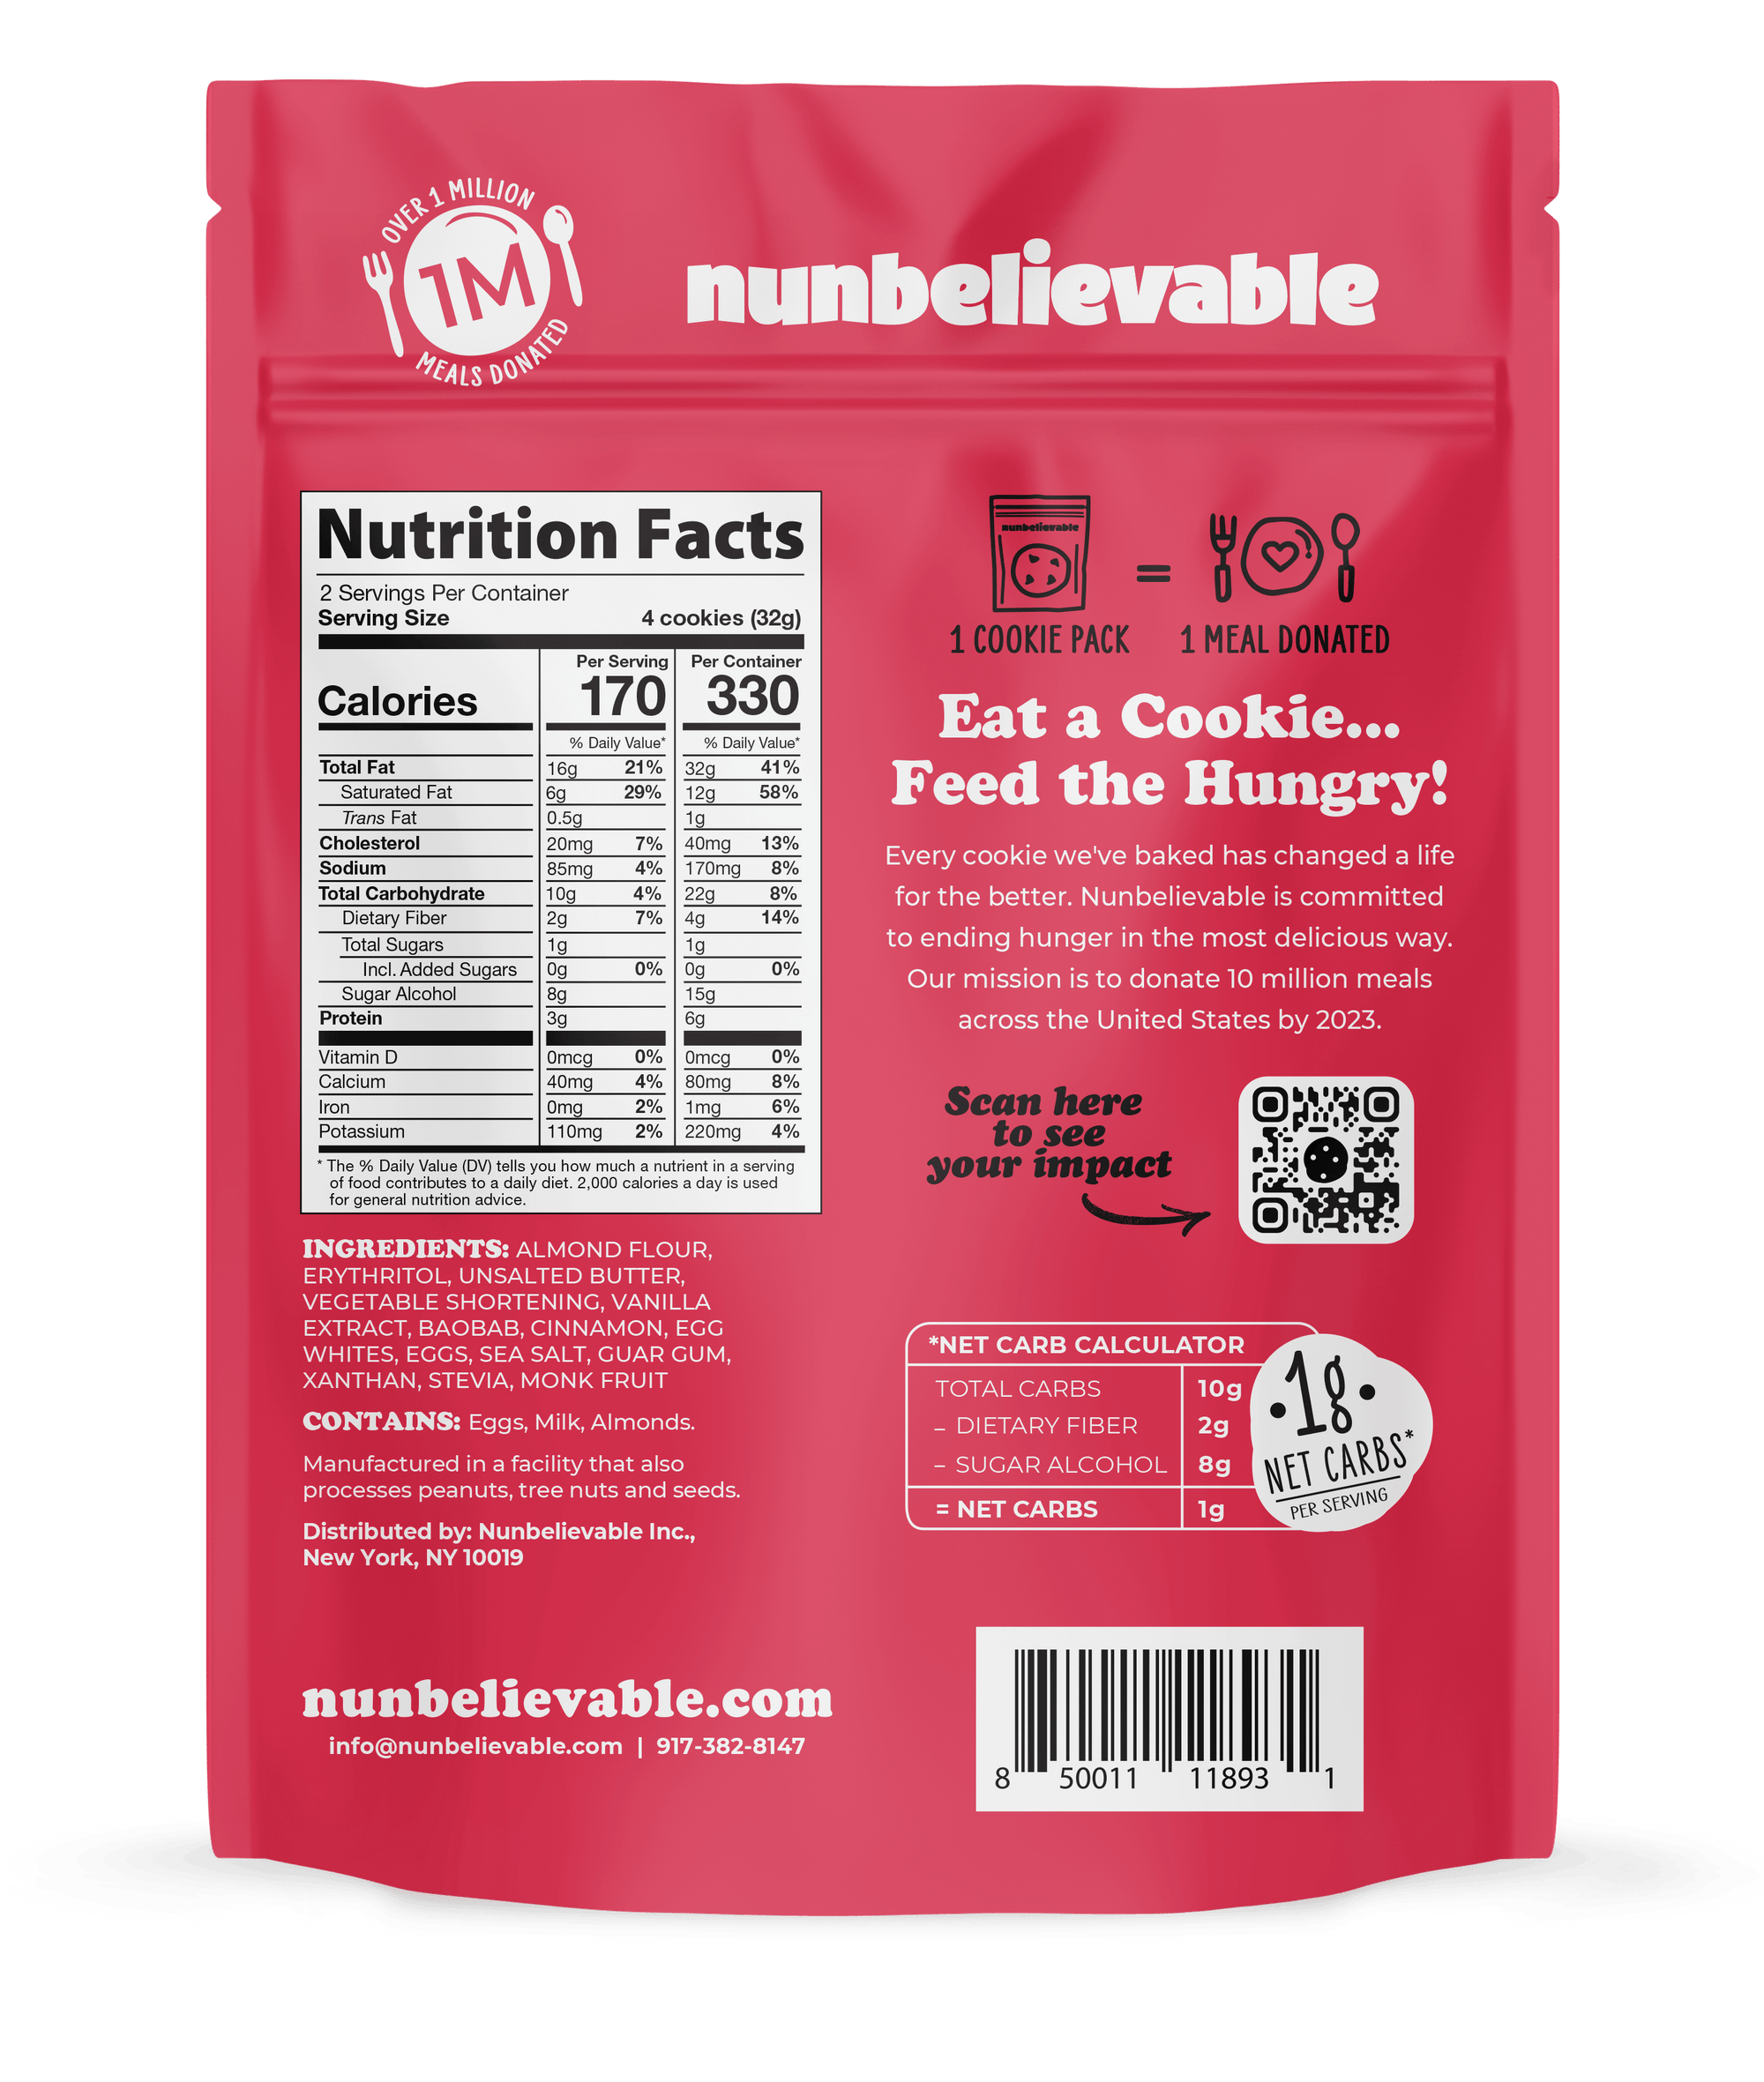 Calorie Counter: Complete nutritional facts for every diet